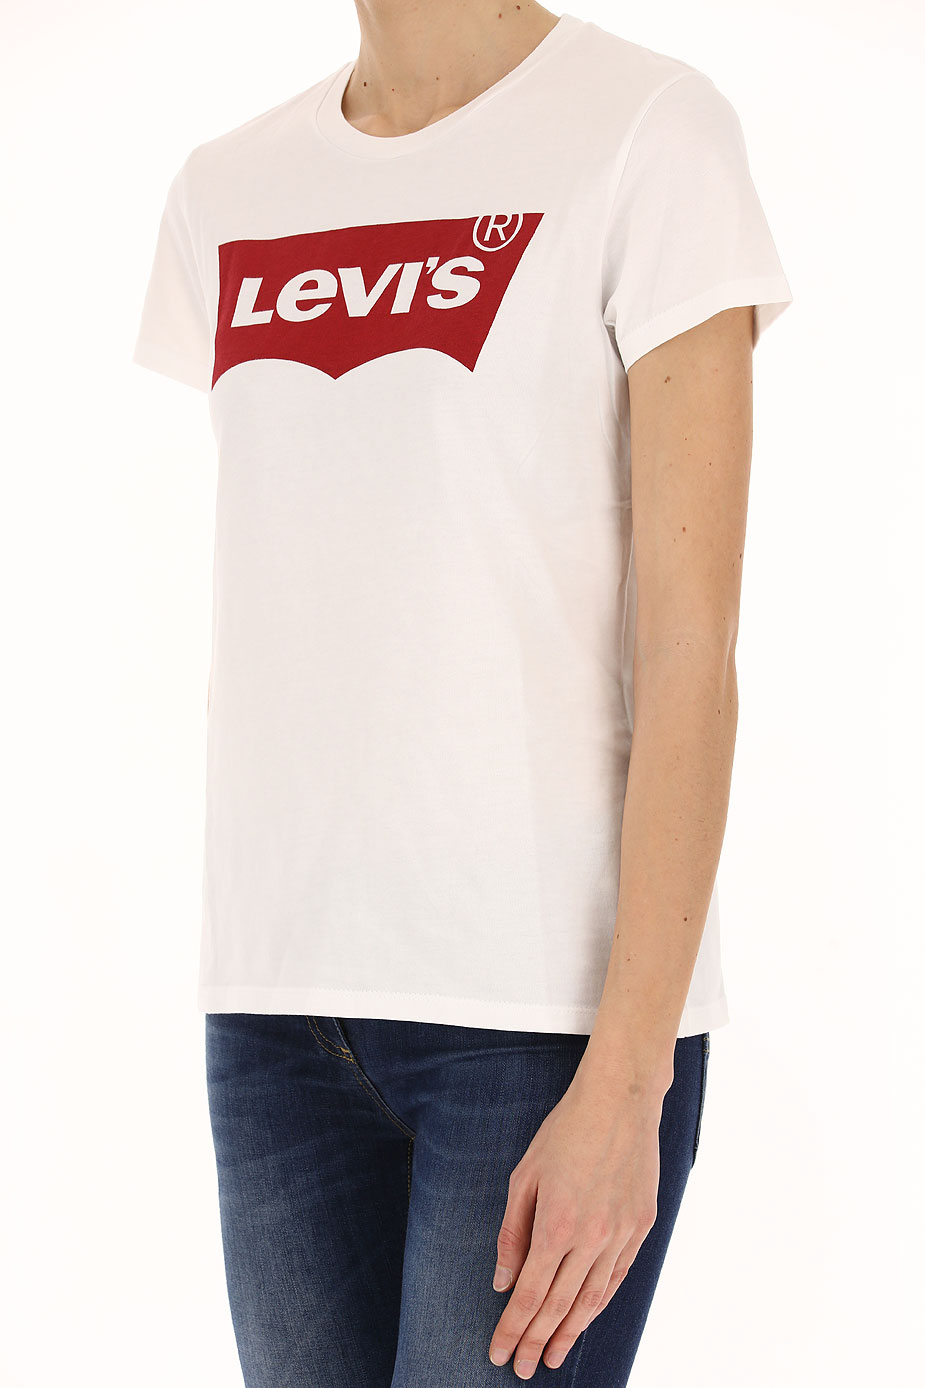 Womens Clothing Levis, Style code: 17369-0053-